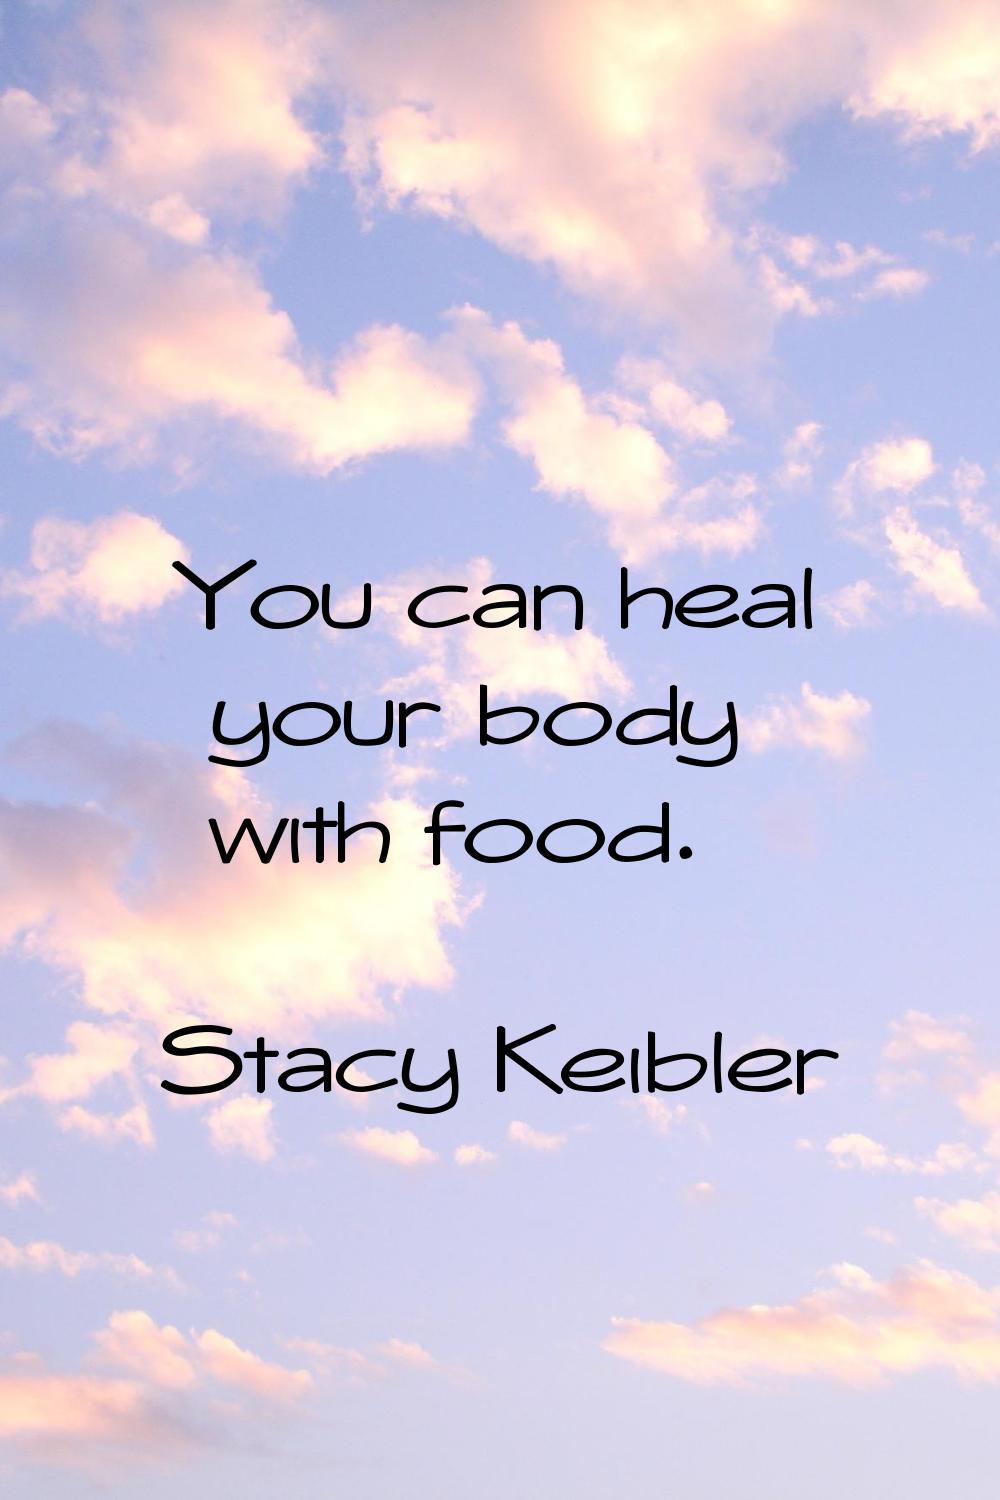 You can heal your body with food.